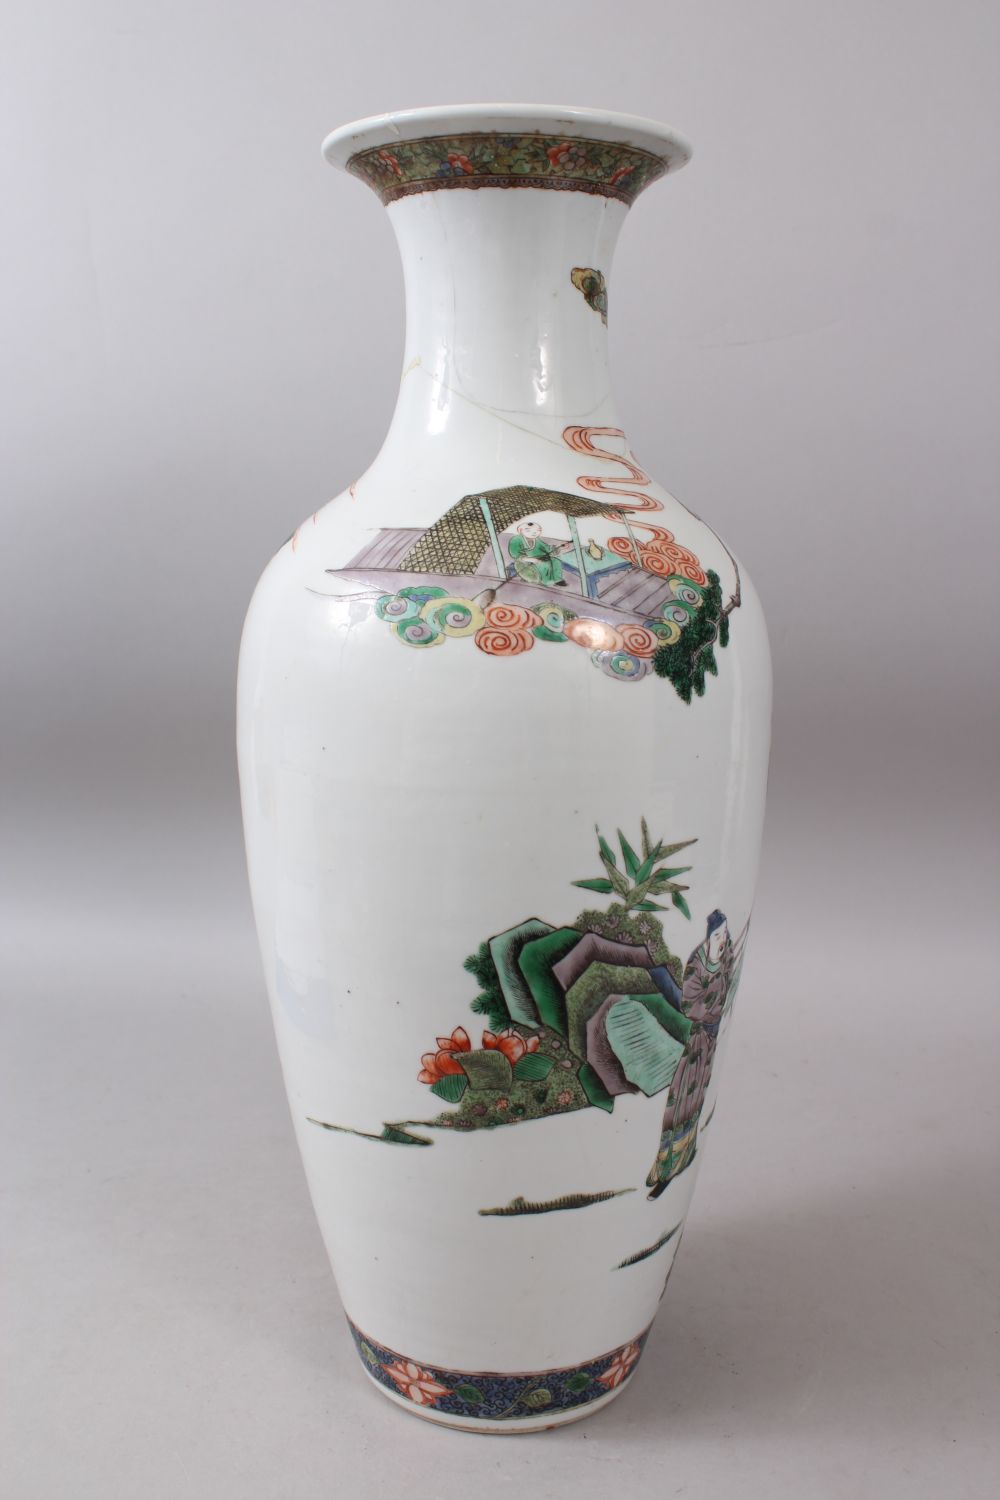 A LARGE CHINESE KANGXI PERIOD FAMILLE VERTE VASE Circa 1700, painted with various figures, trees - Image 3 of 10